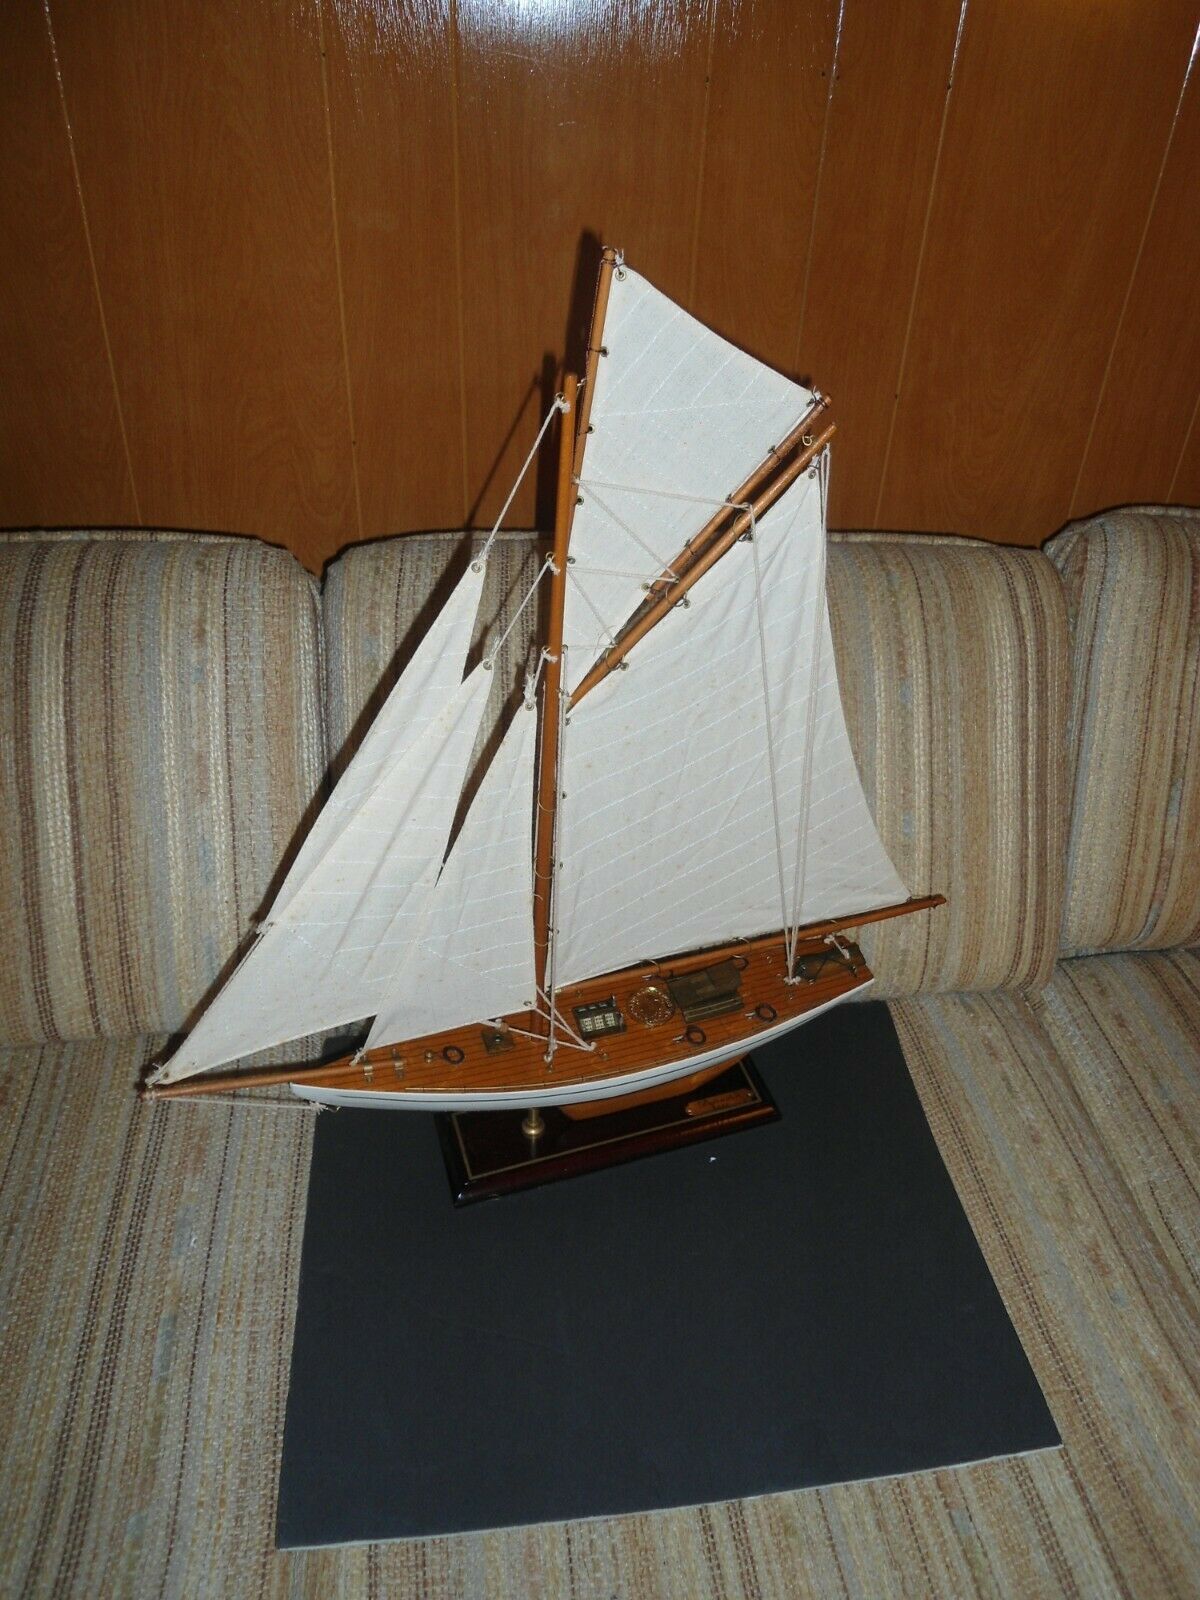 Americ's Cup Sailing Yacht Wood Model  Defender 1895 22"x24"  452c Shipped Disma